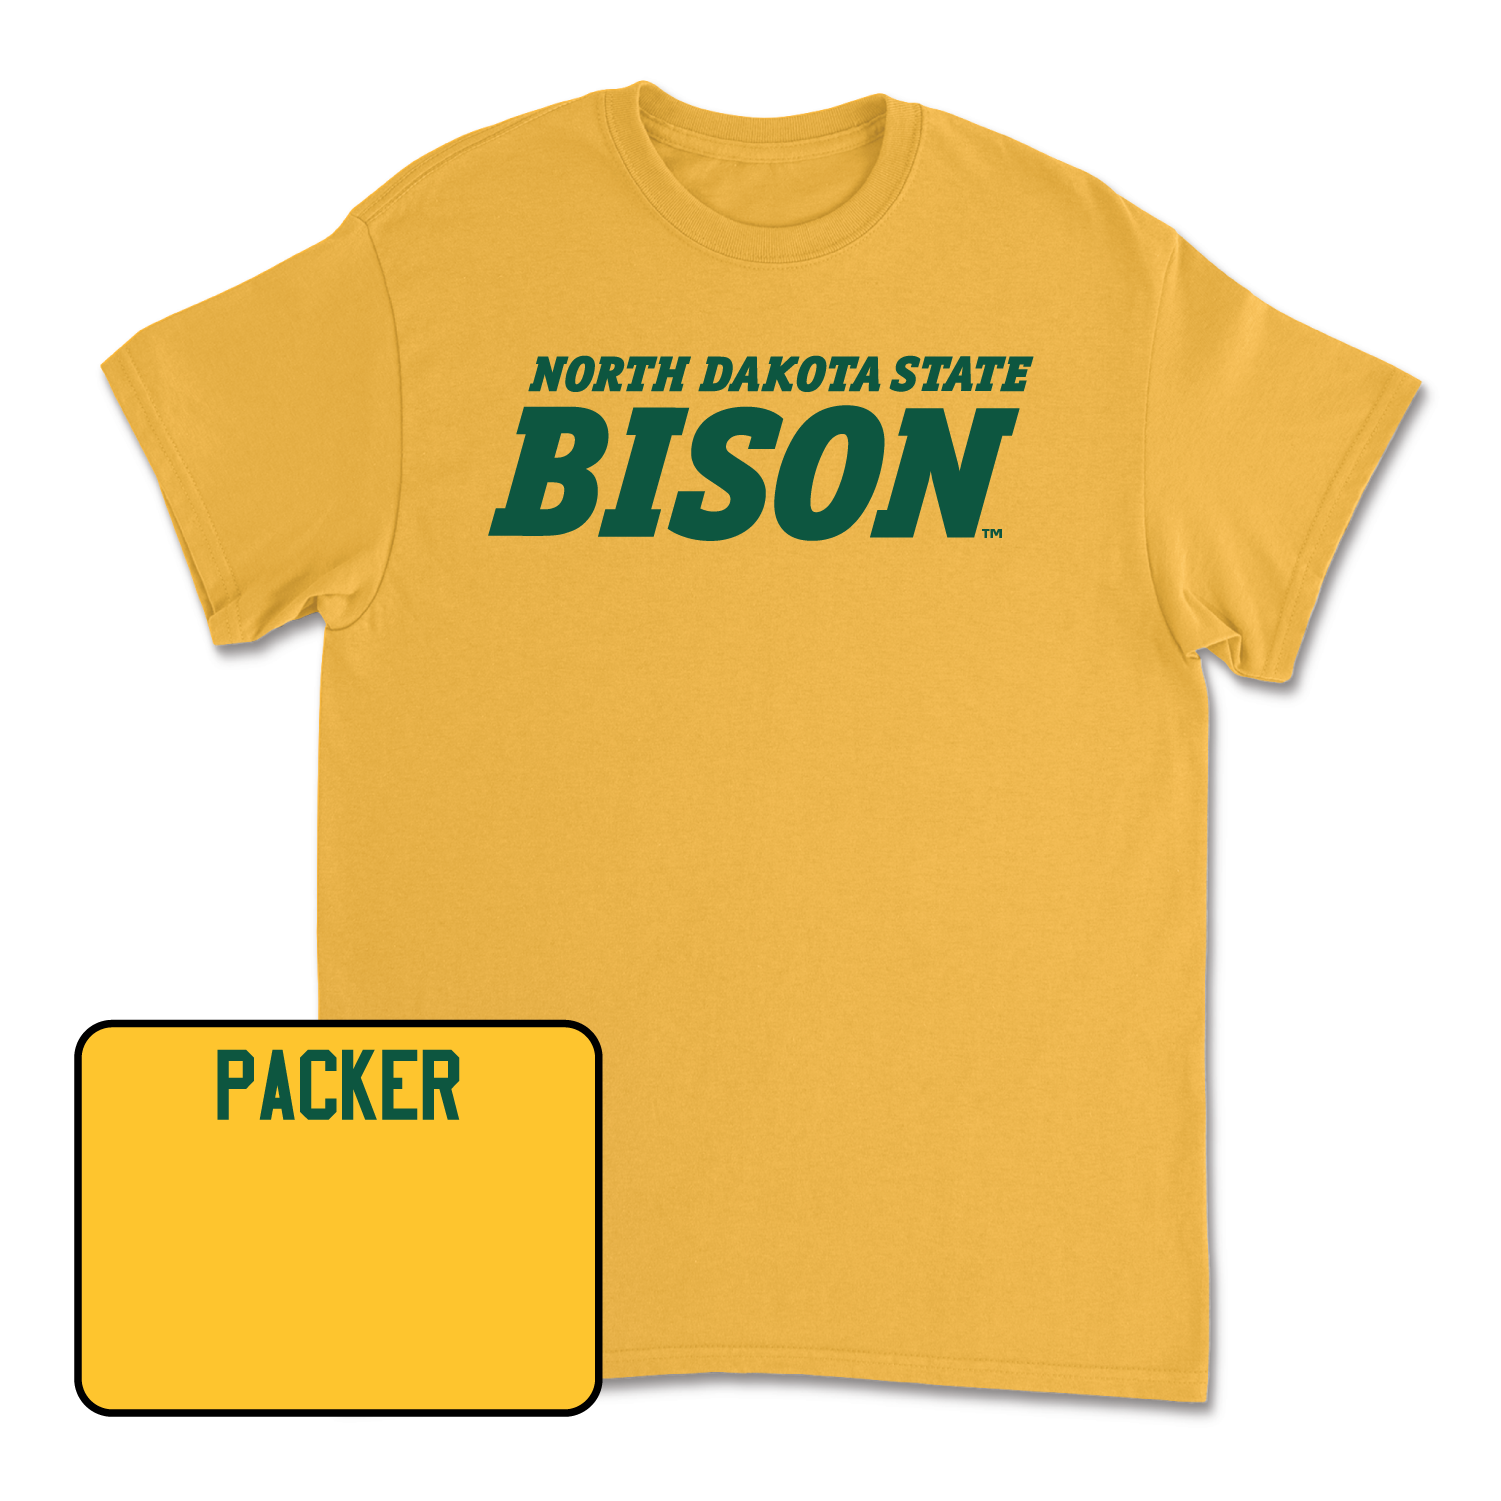 Gold Track & Field Bison Tee 4X-Large / Jack Packer